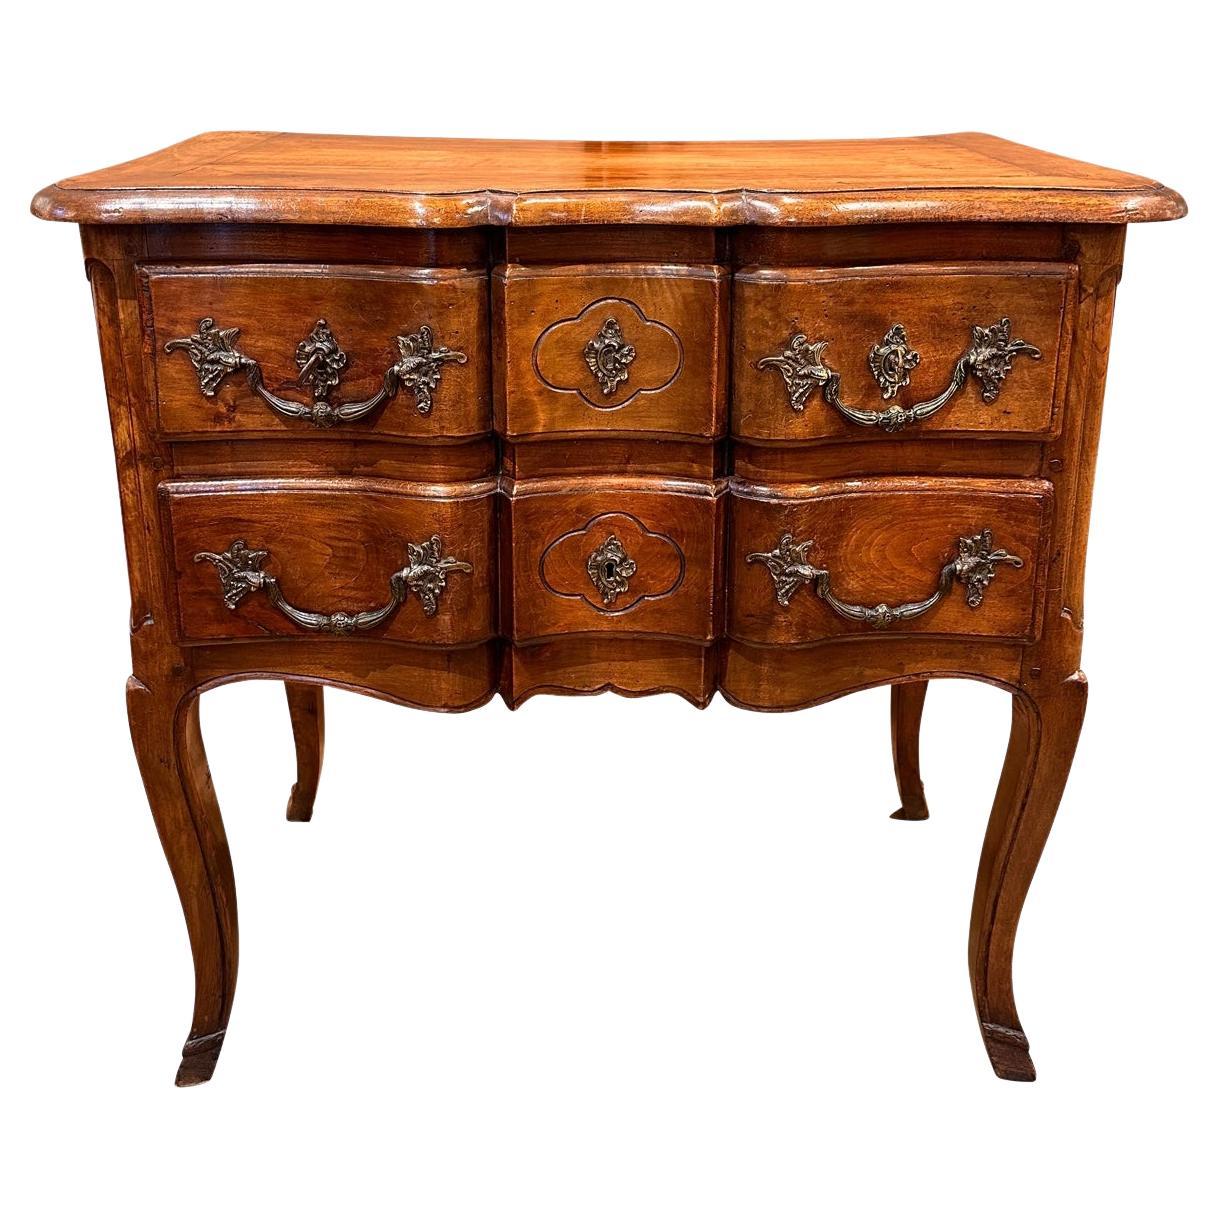 19th Century French Chest